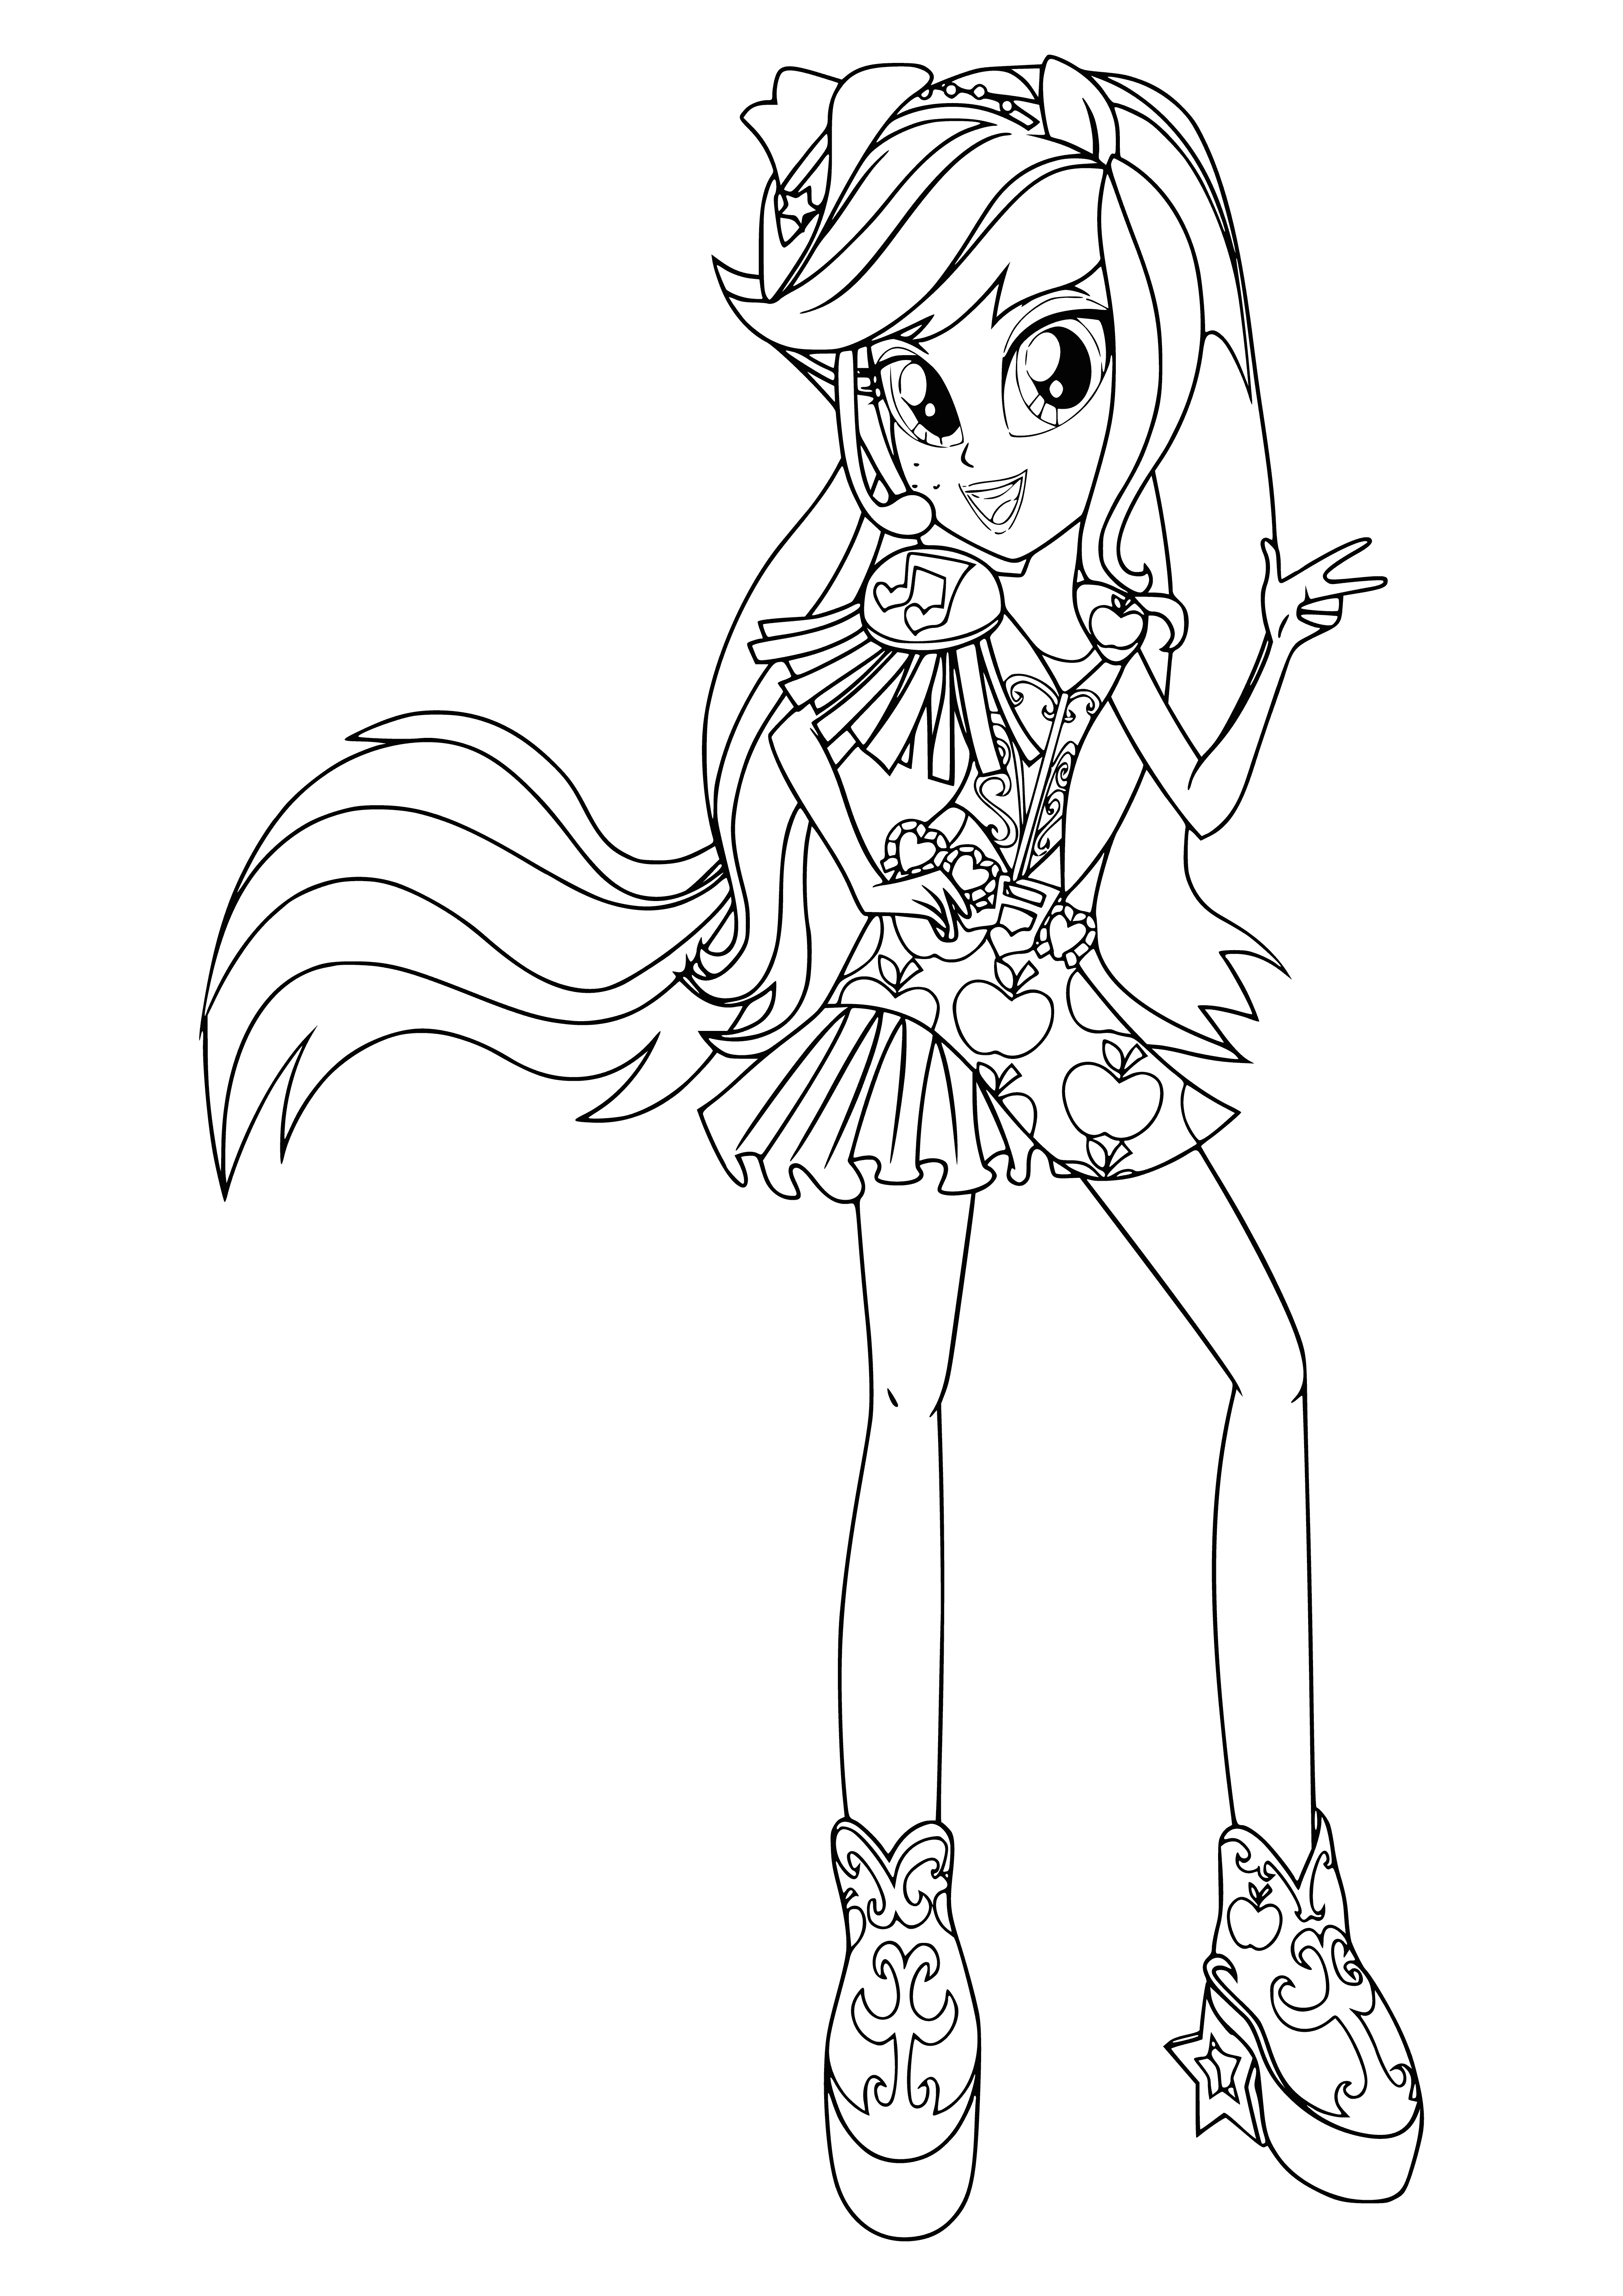 coloring page: Applejack, a teen with orange hair, plays guitar while wearing green & white checkered shirt, green jacket, & blue jeans.